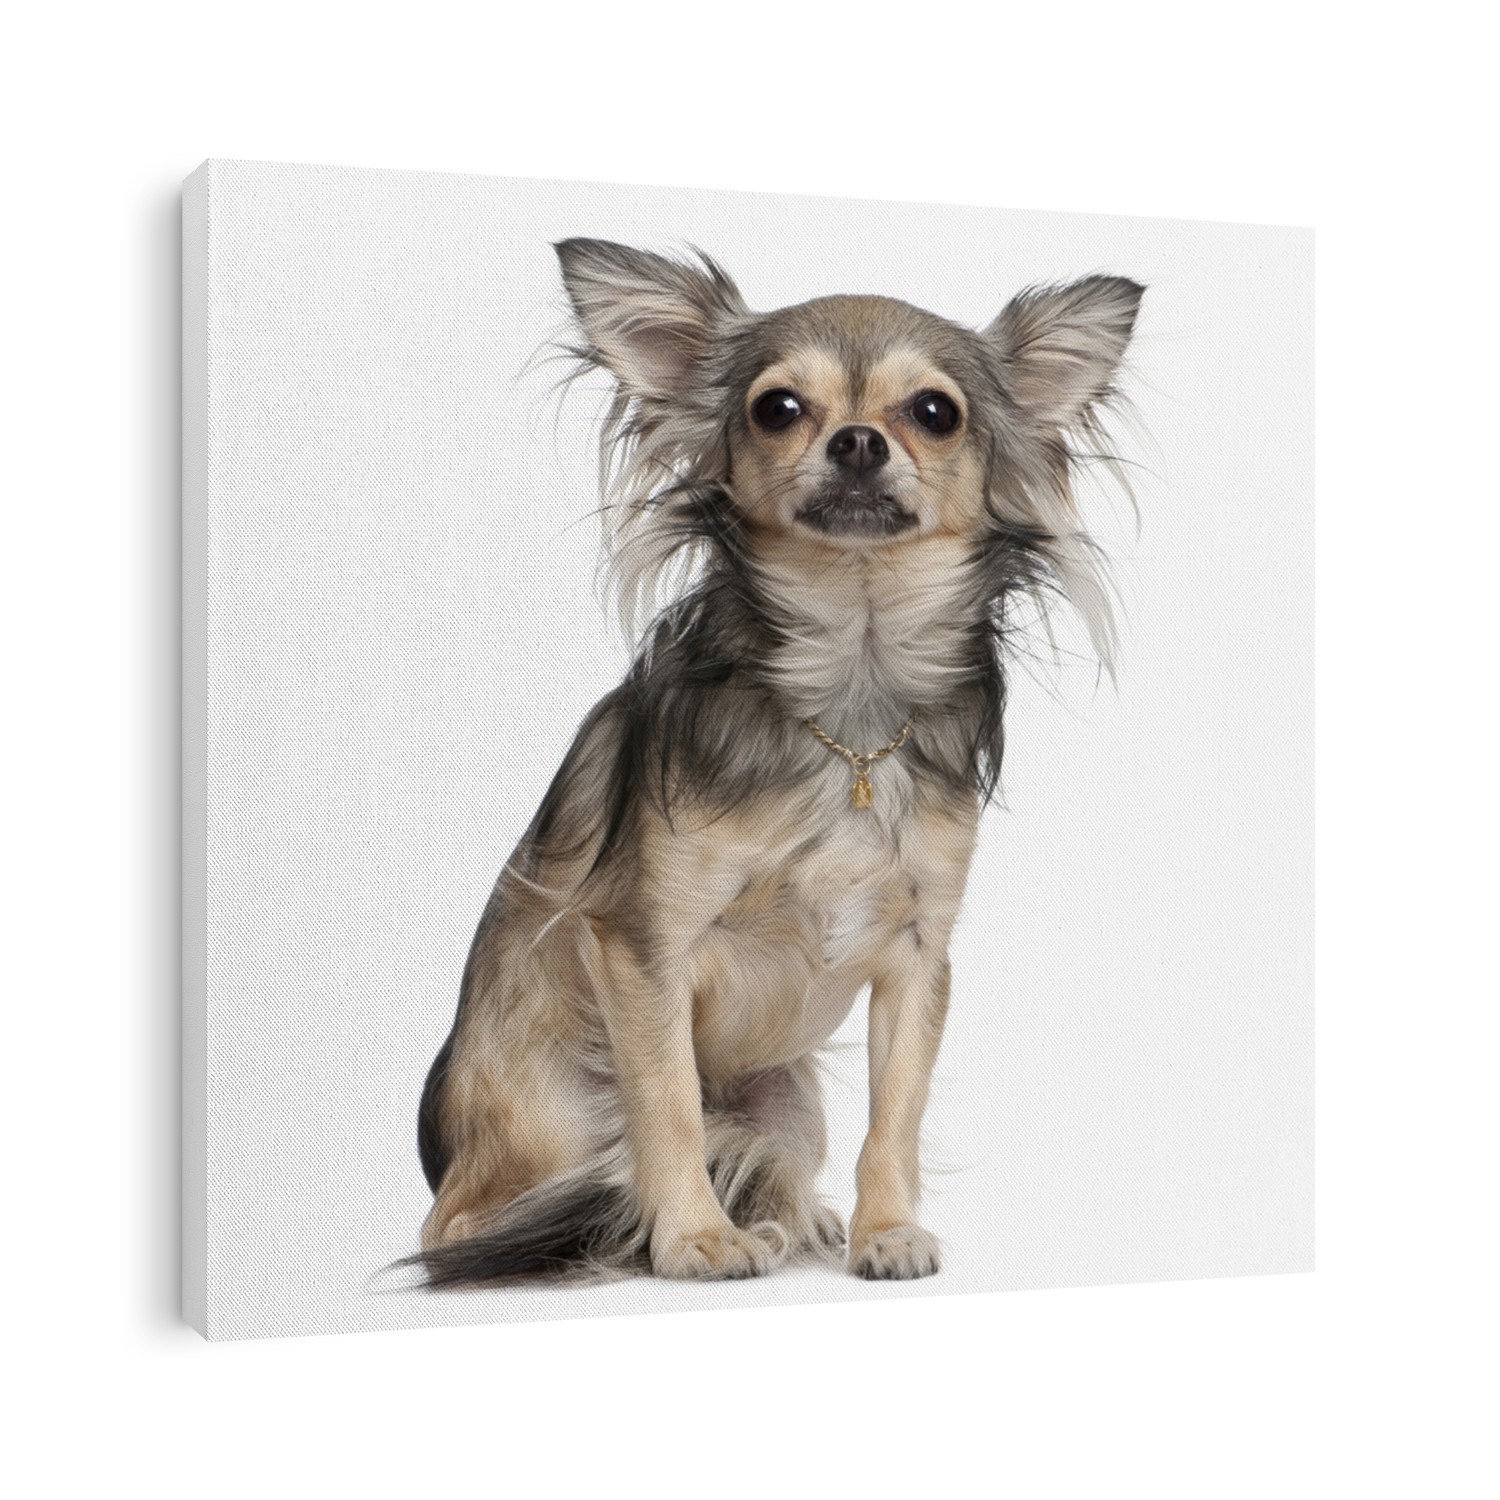 long haired chihuahua (2 years old) in front of a white background